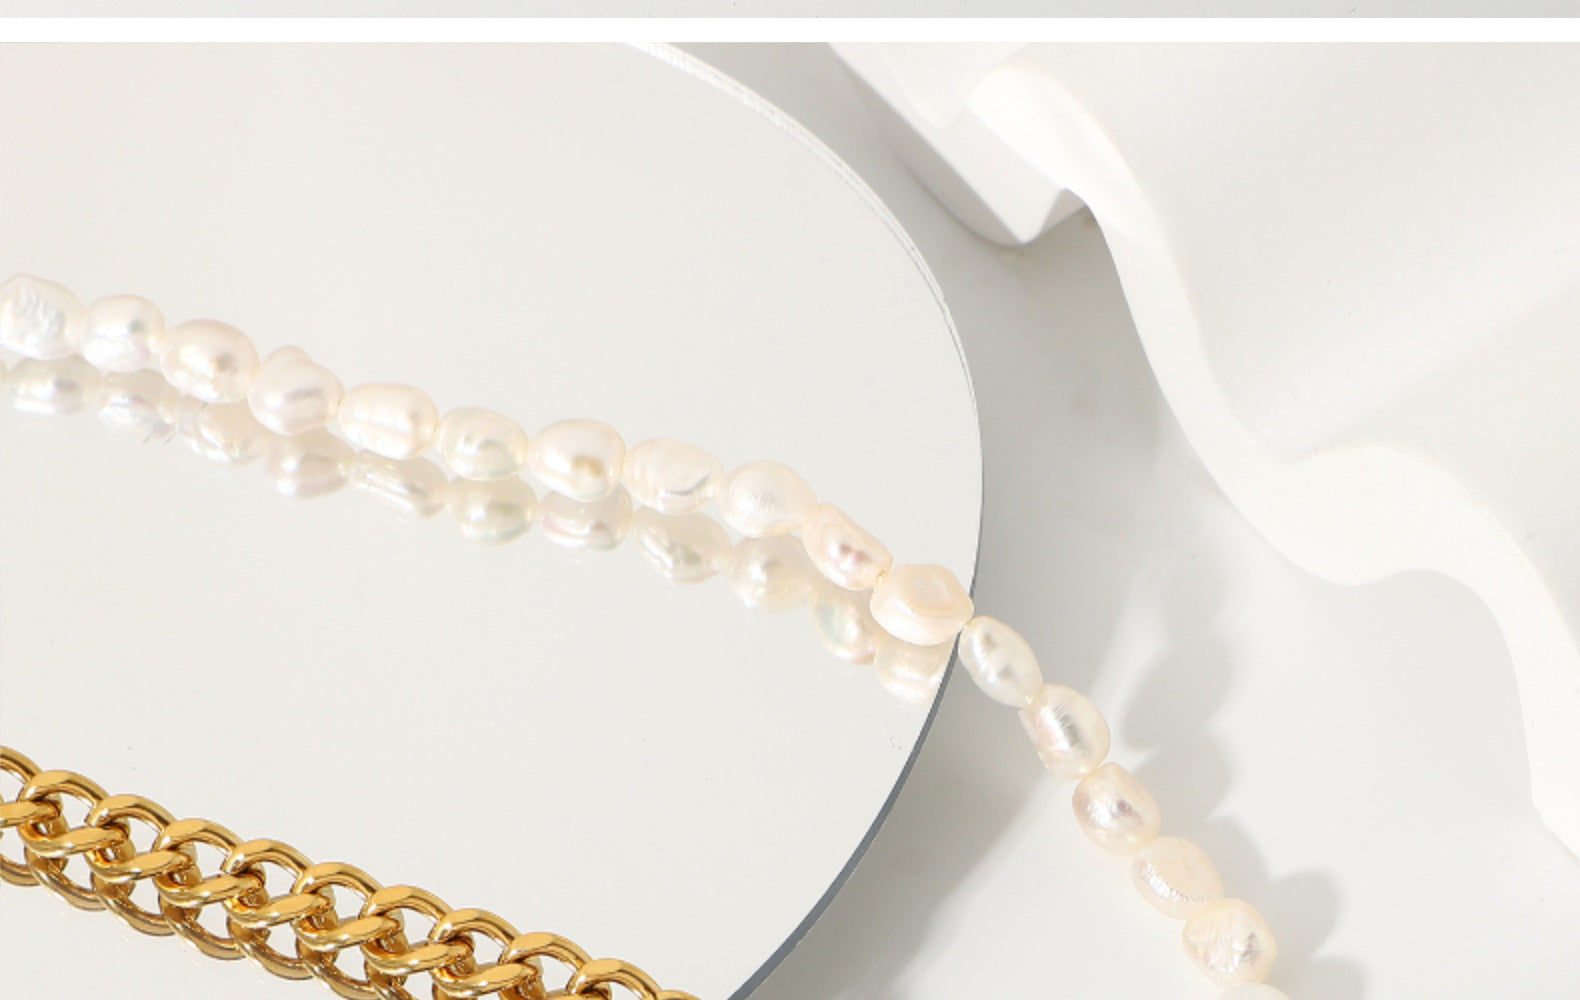  cuban link chain with pendant-Pearl Buckle Cuban Chain Necklace- bling cuban link chain- pearl necklace